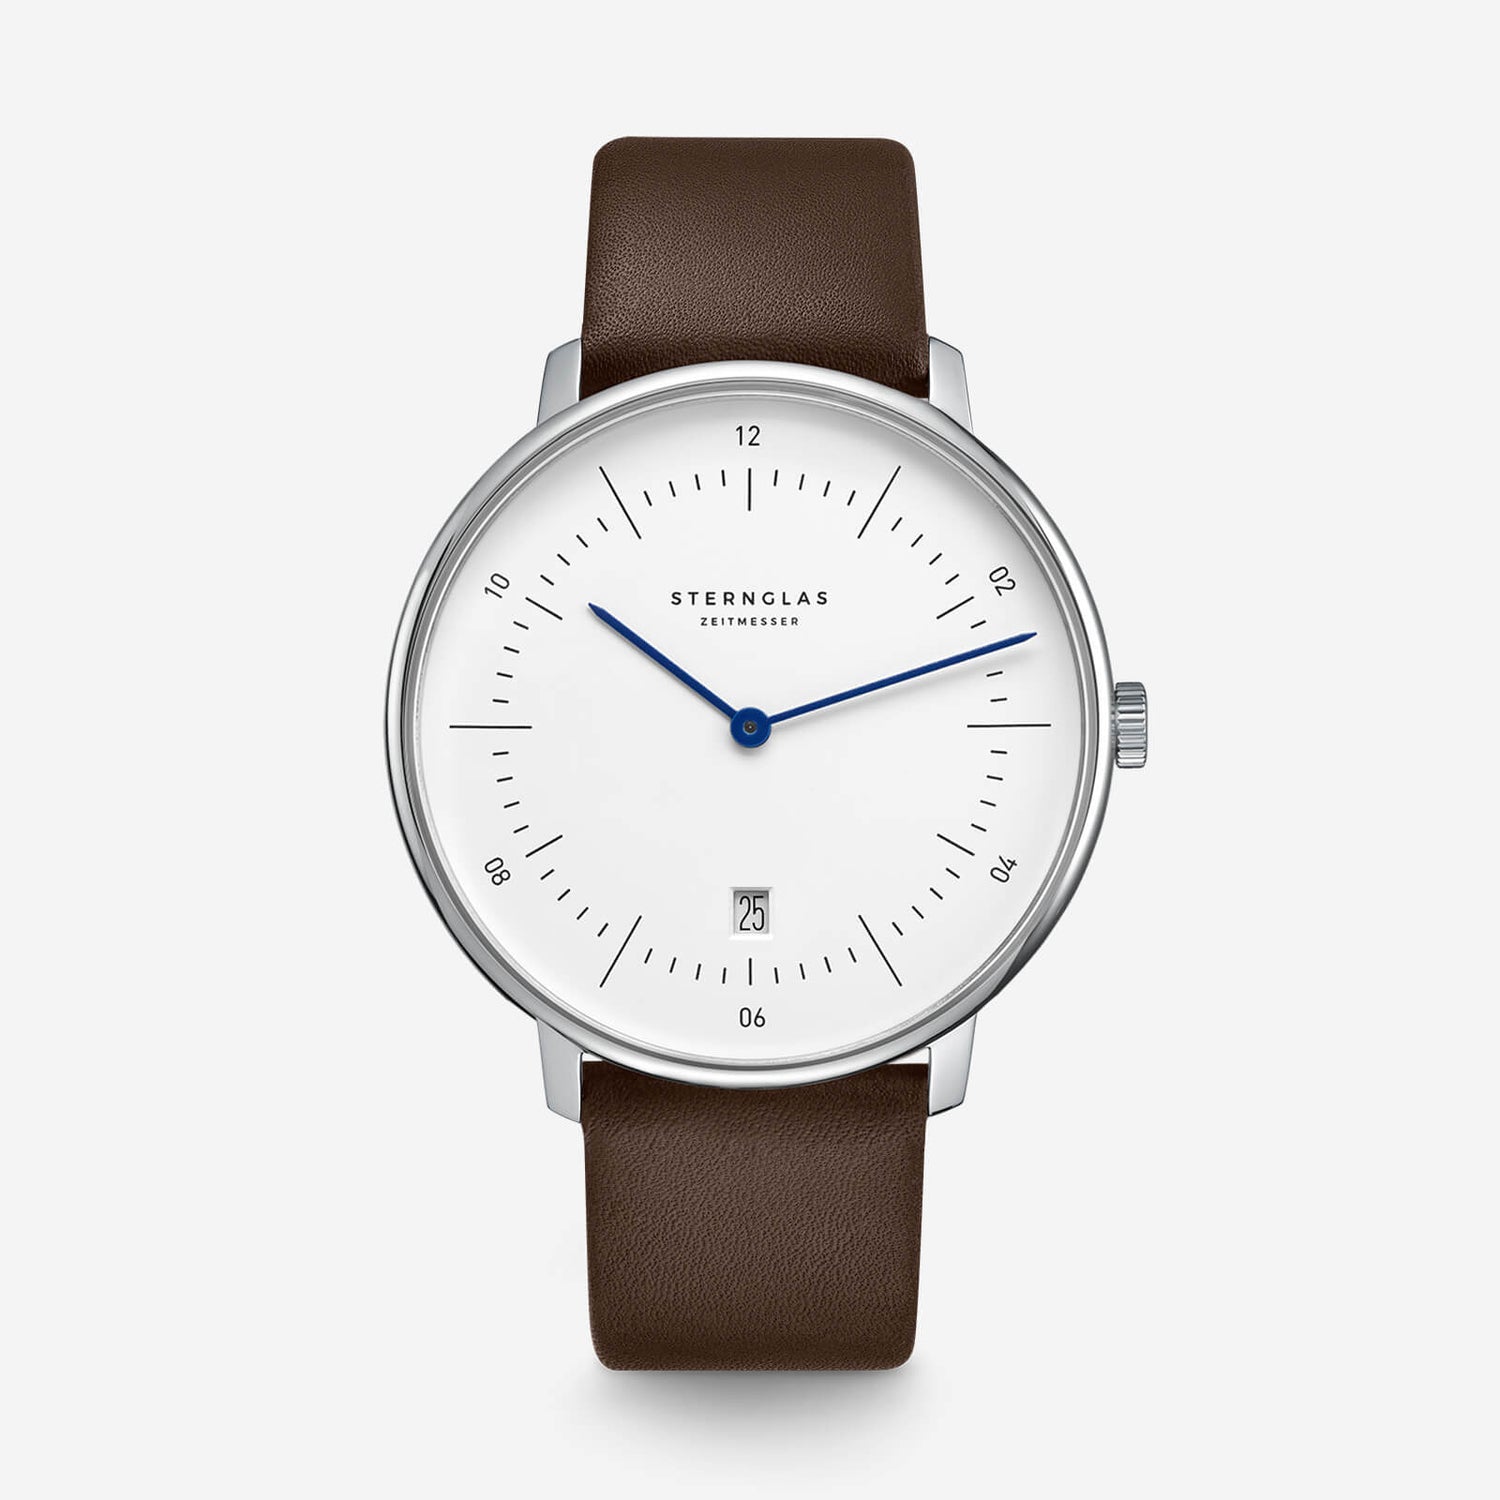 popup|Classic Bauhaus Design|Inspired by the Bauhaus movement of the 1920s, the dial is kept minimalistic and clear. "Form follows function" as they say.